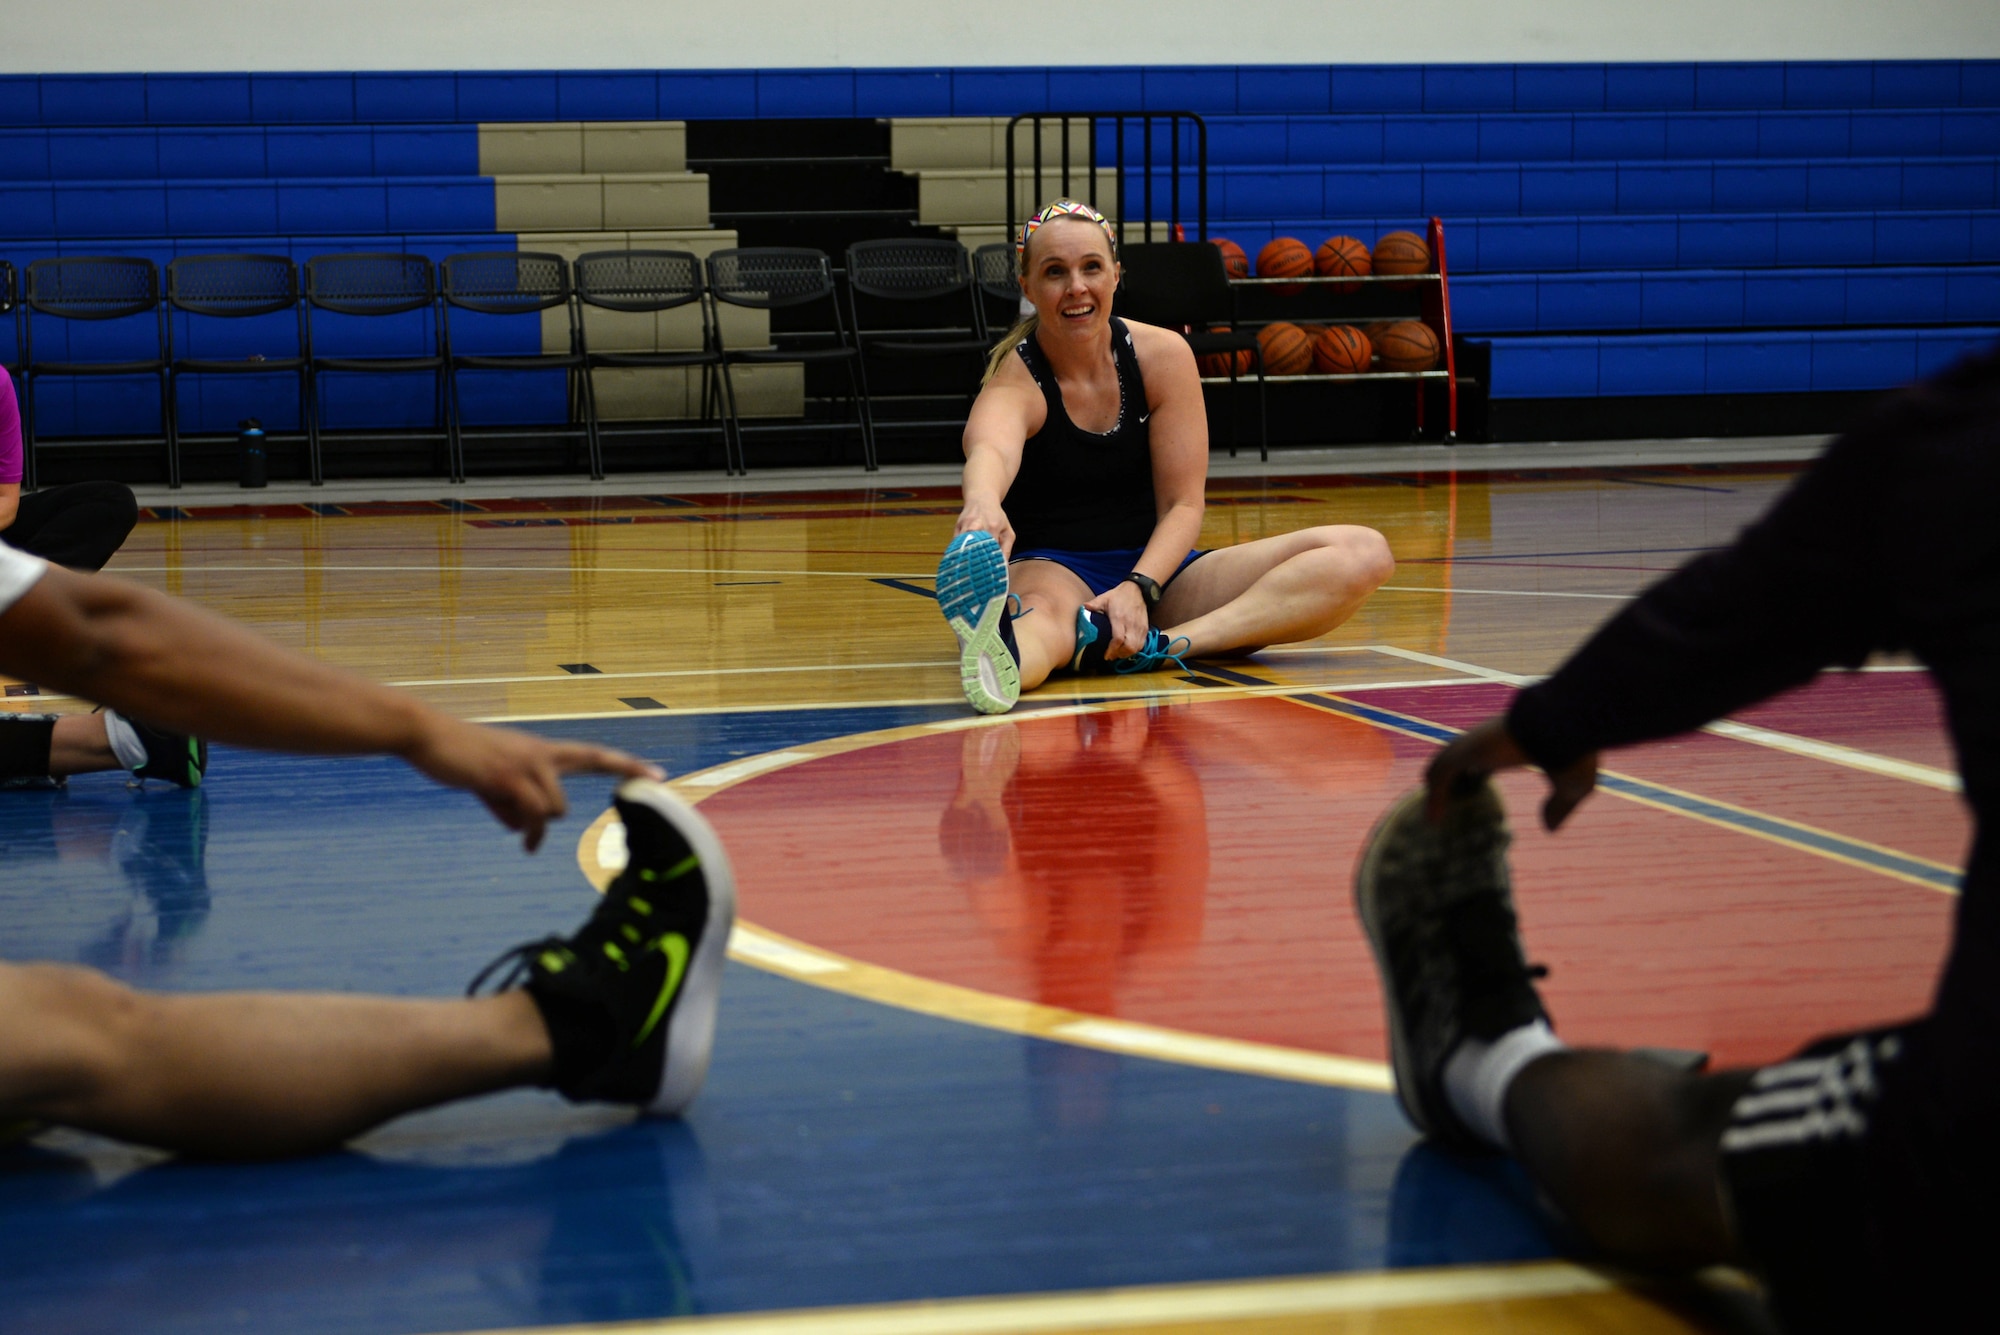 Maj. Elizabeth Liebner, 36th MDOS Physical Therapy Officer, stretches with a runner's clinic class after a work-out March 21, 2018, at Andersen Air Force Base, Guam. The Andersen Physical Therapy team is implementing a new running clinic to teach and improve active duty service members running abilities April 19 at 1500, held in the Coral Reef Fitness Center basketball courts. (U.S. Air Force photo by Senior Airman Alexa Ann Henderson)